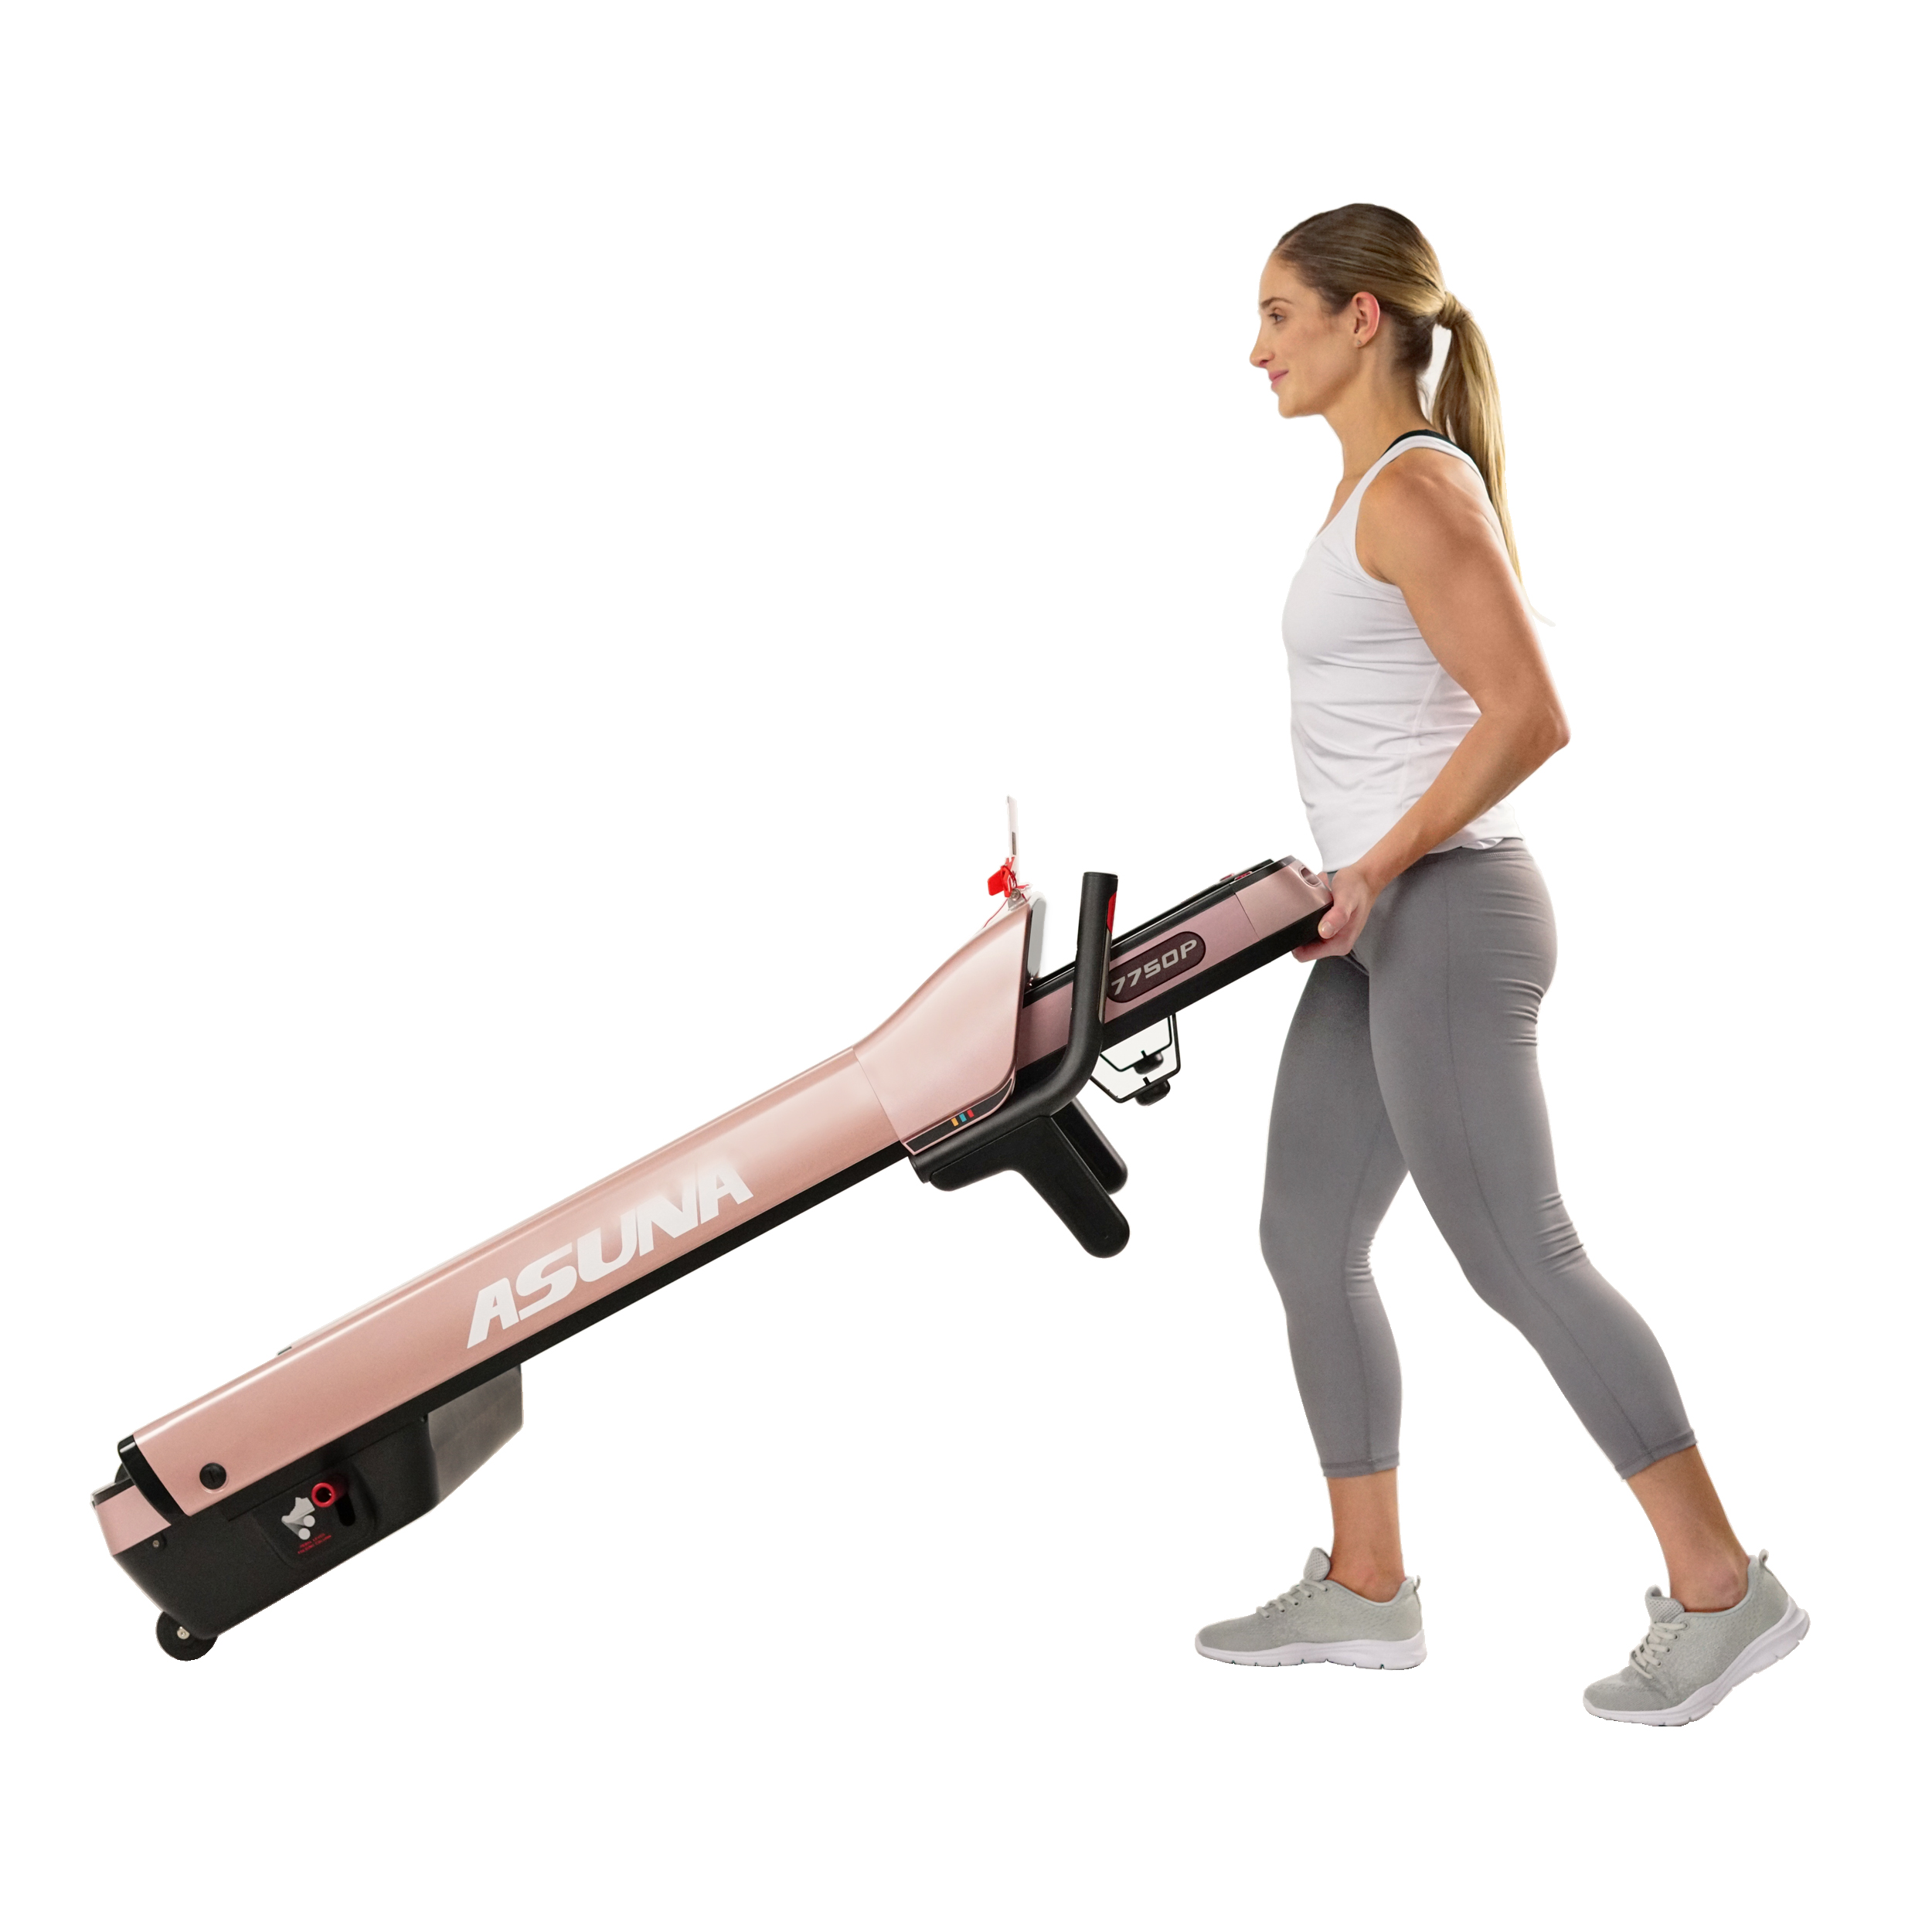 ASUNA SpaceFlex Motorized Treadmill with Auto Incline, Wide Folding Belt - 7750Pink - image 8 of 9